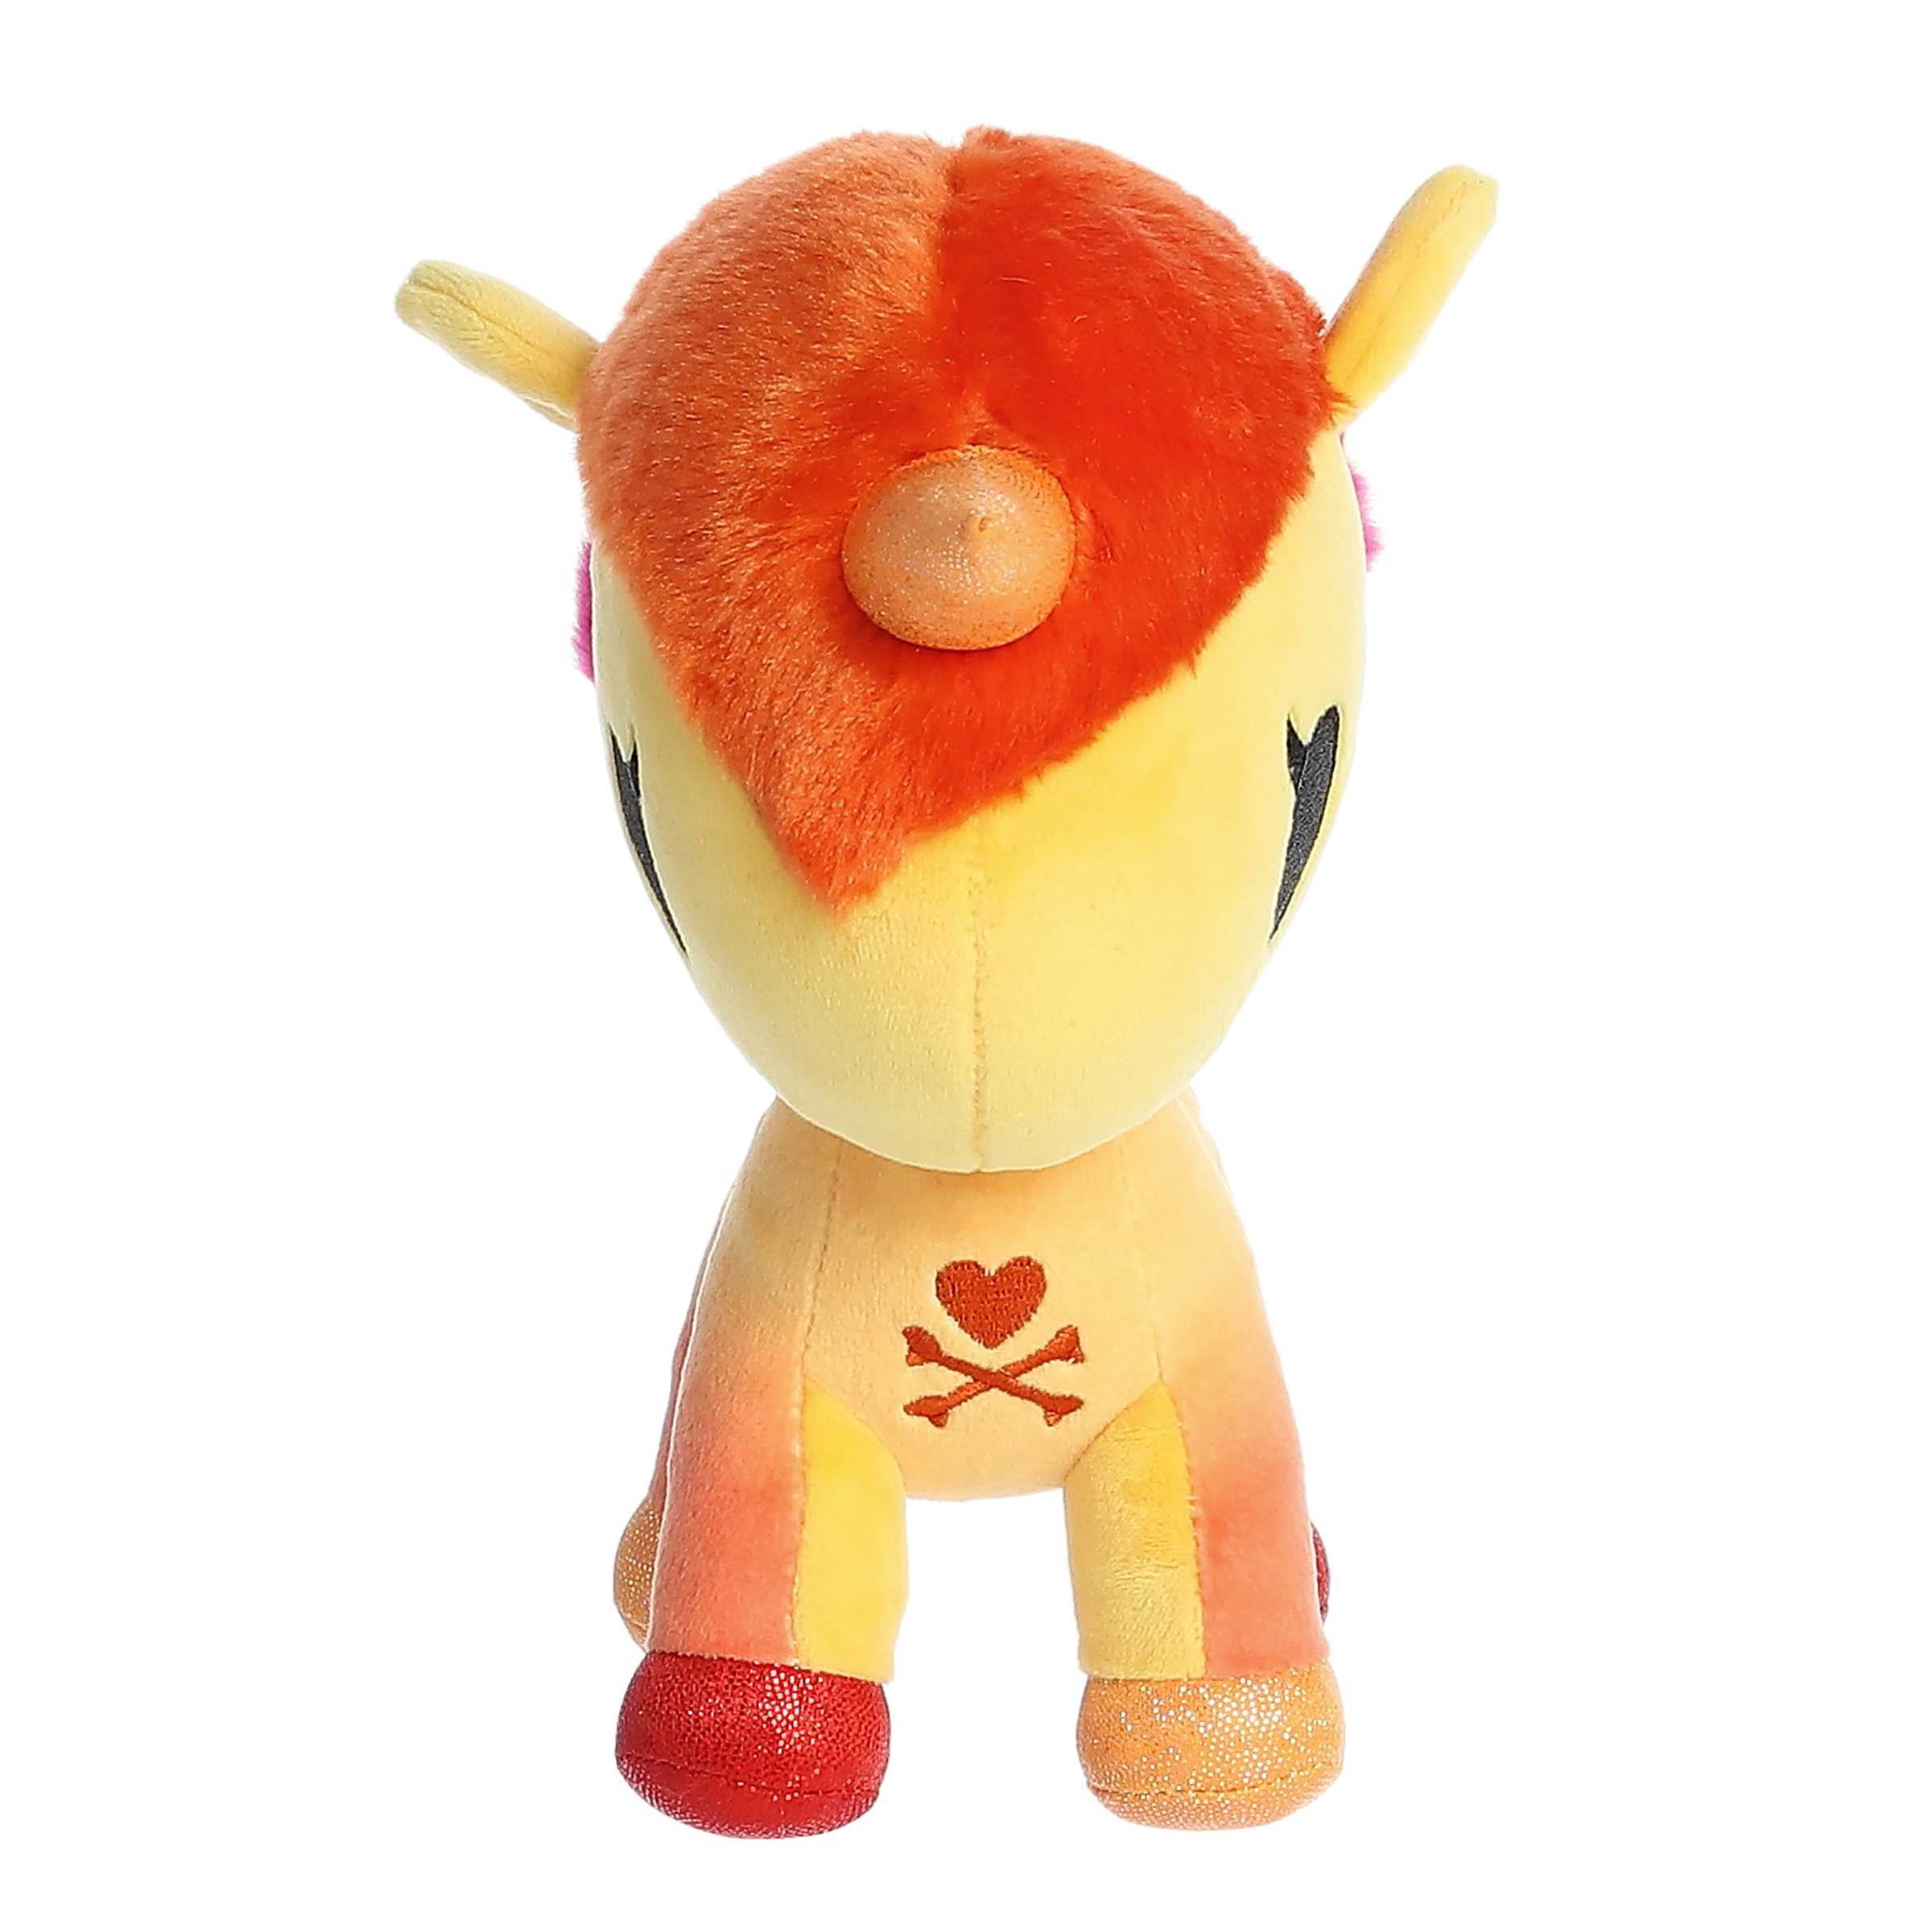 Official Tokidoki Plush Toy 453066: Buy Online on Offer